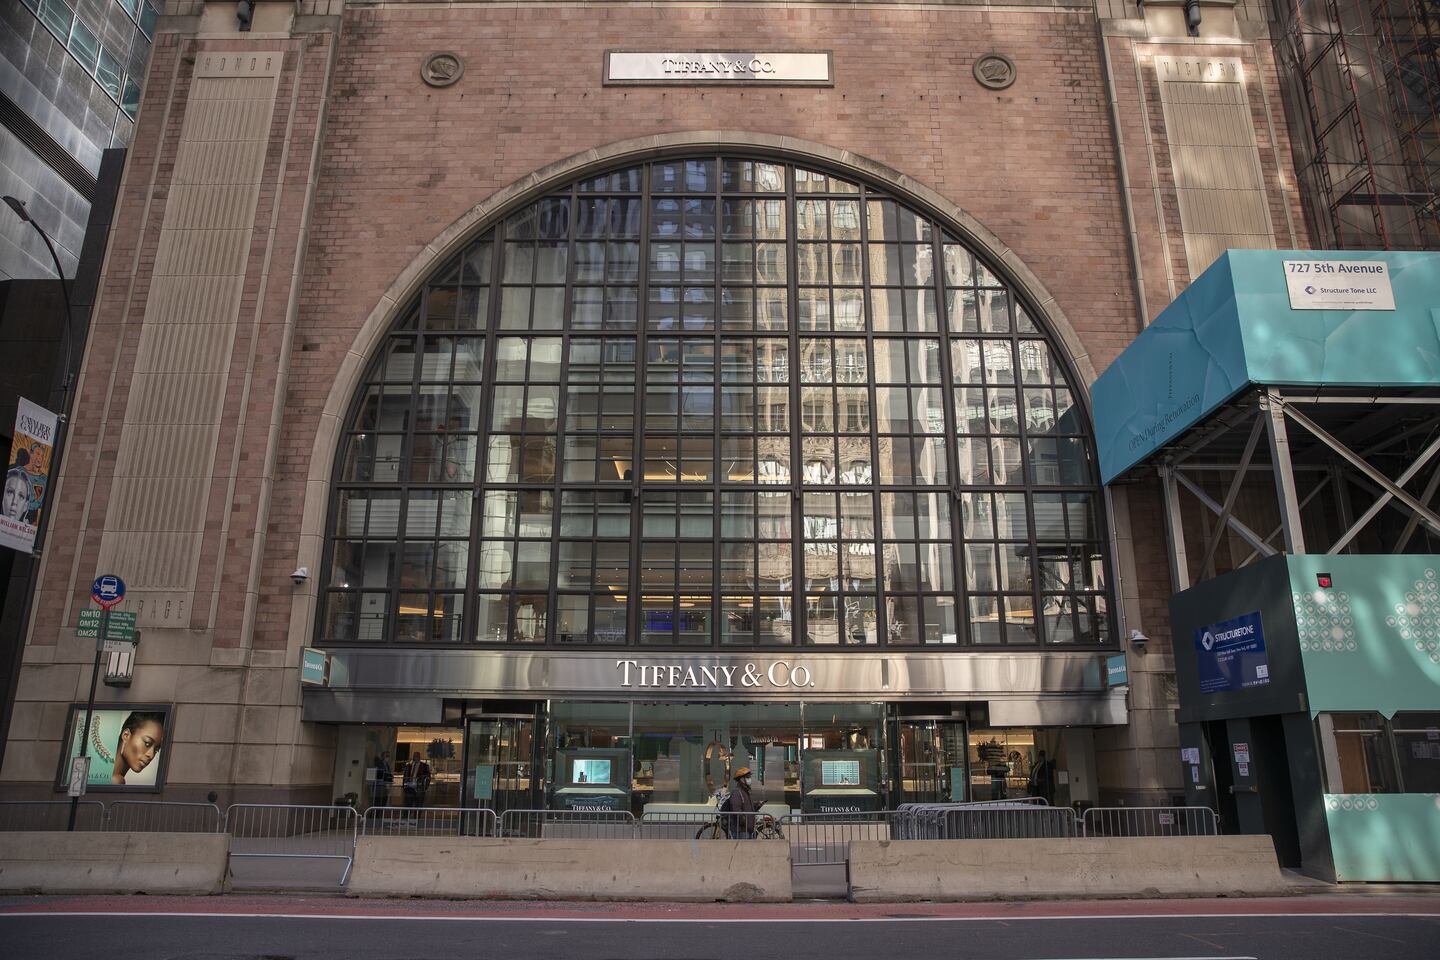 The Tiffany & Co. store in its temporary locations. Victor J. Blue/Bloomberg via Getty Images